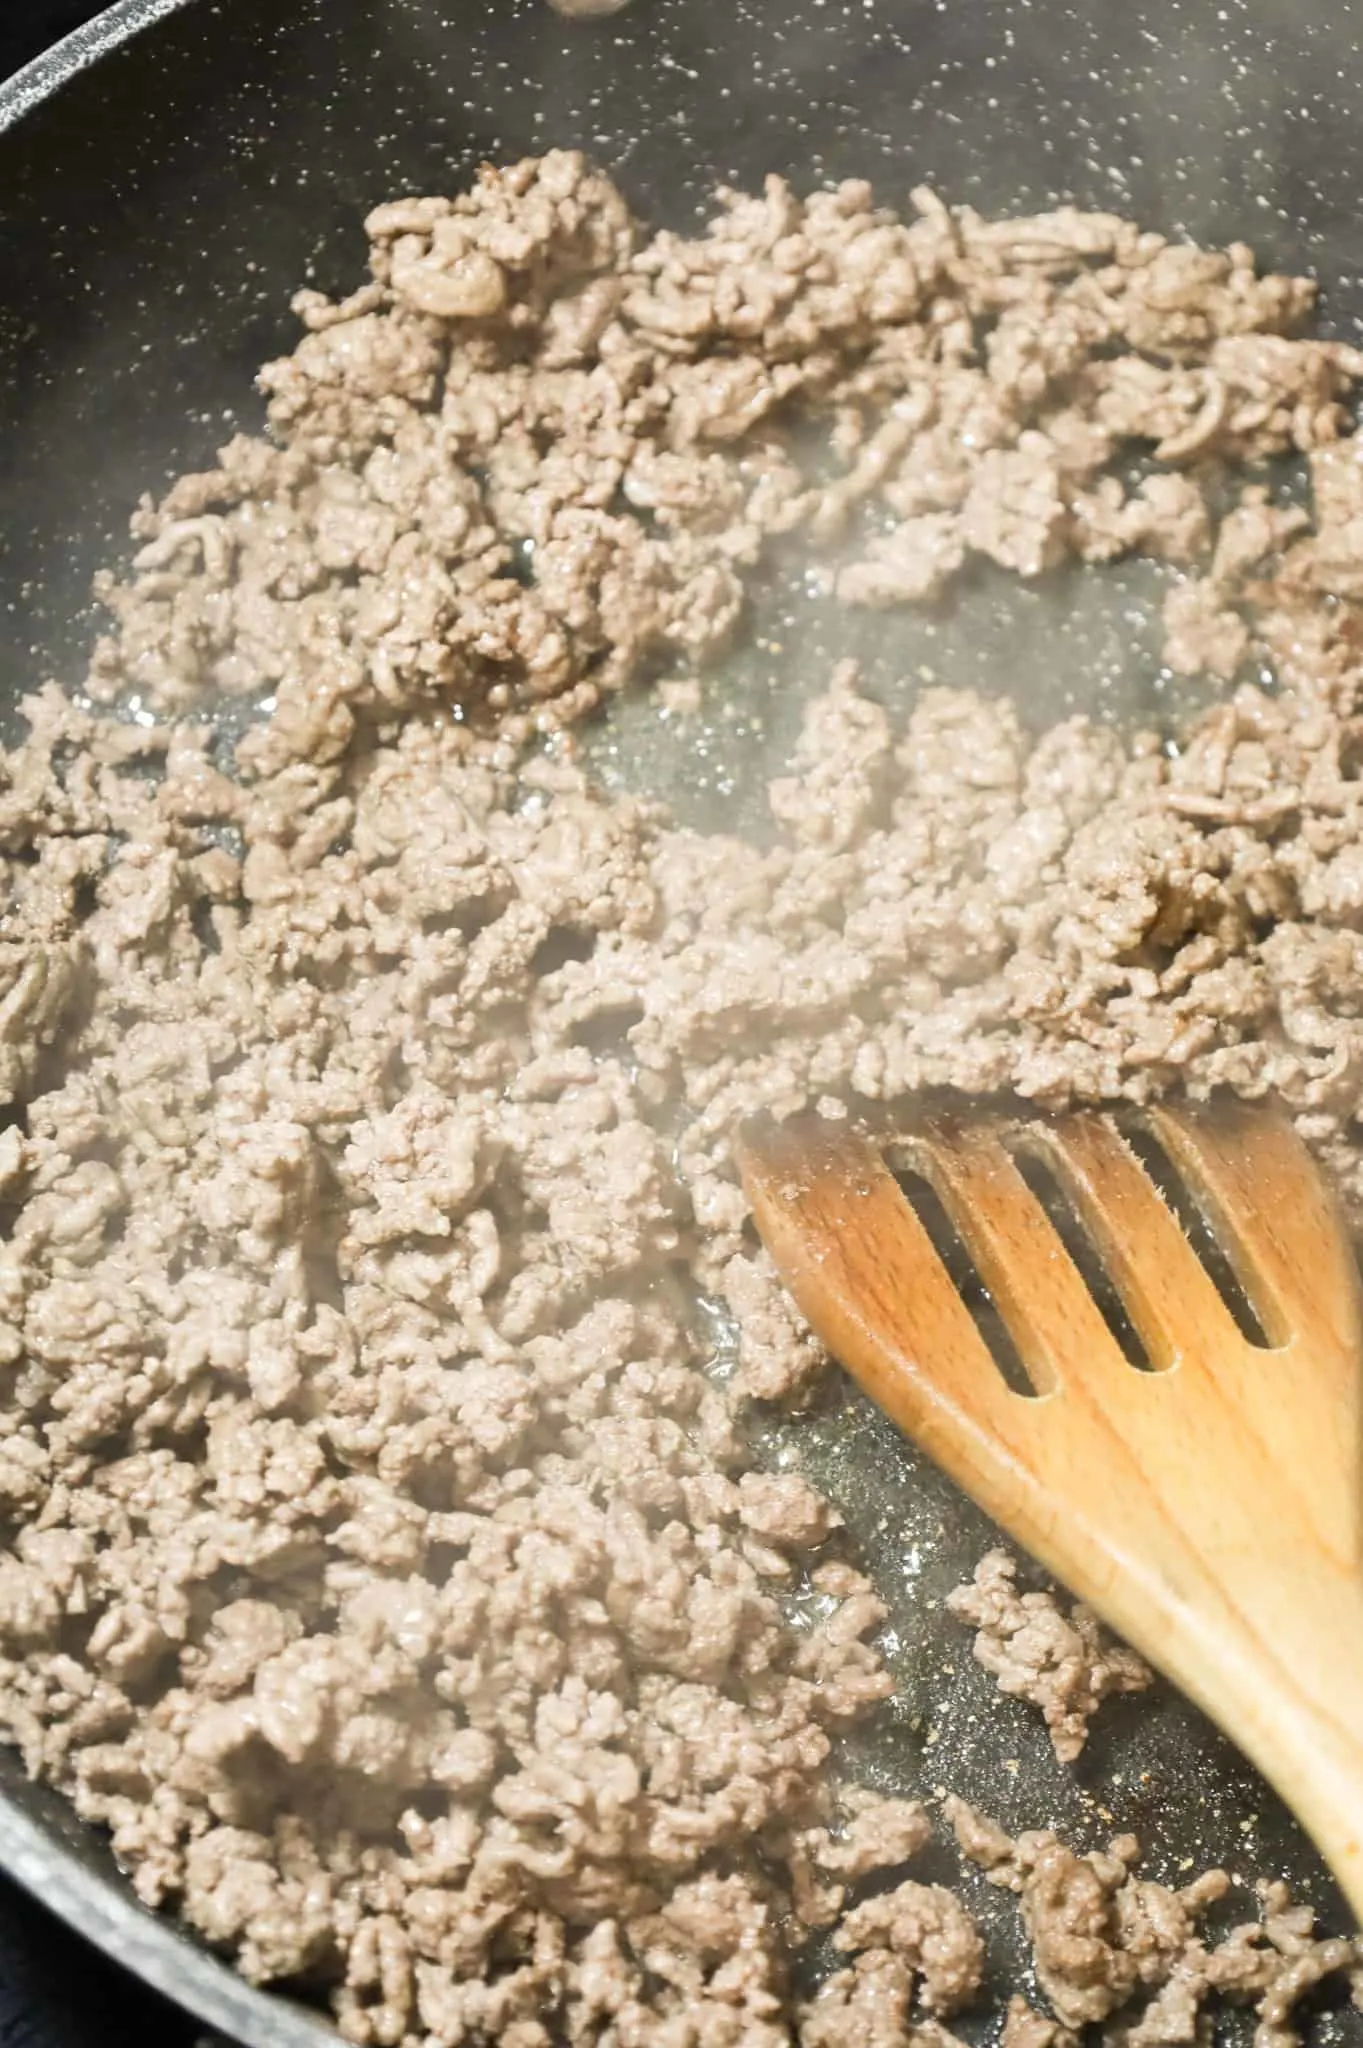 crumbled ground beef browning in a skillet